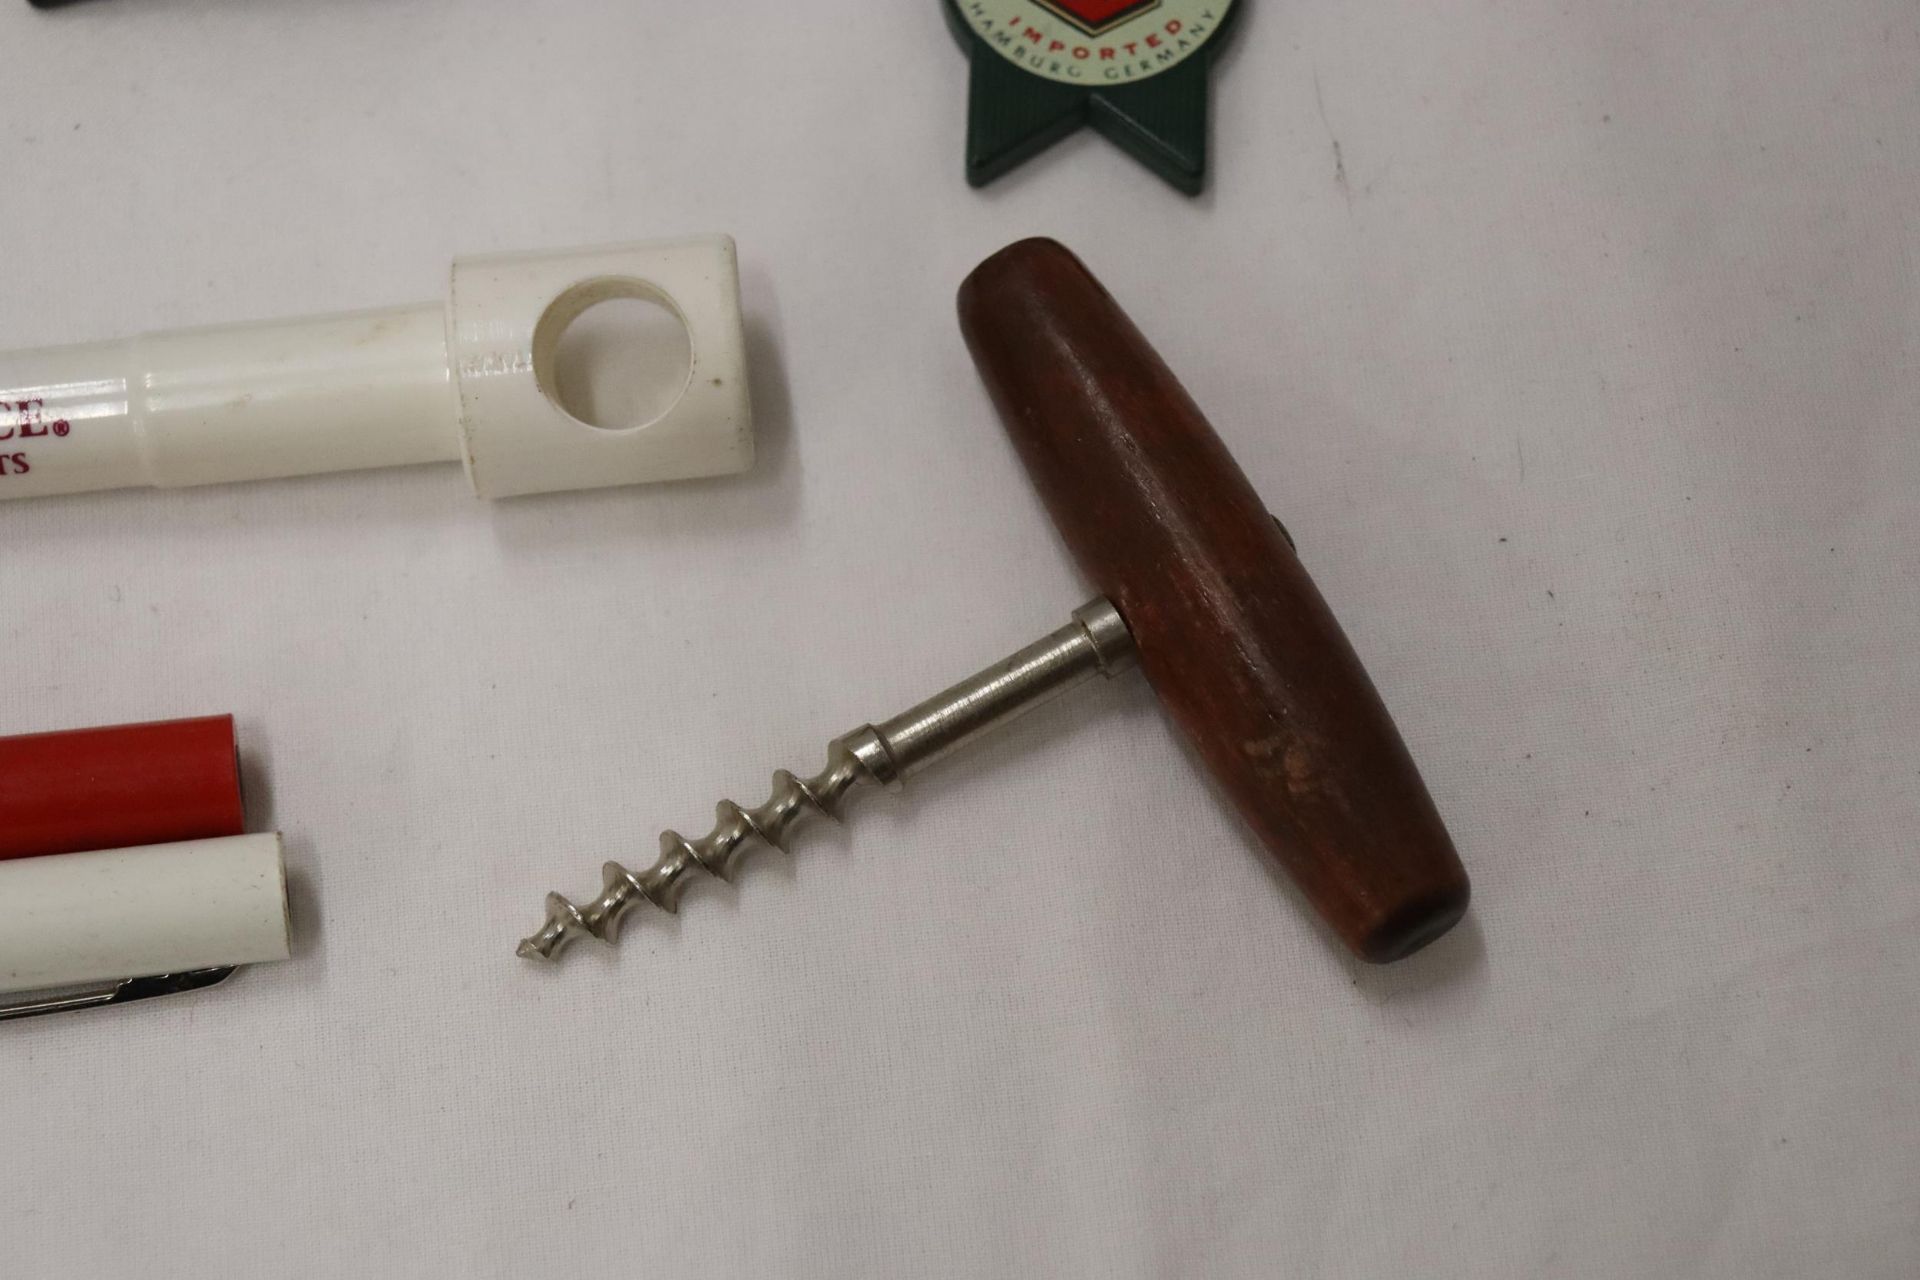 ELEVEN PIECES OF BREWERIANA TO INCLUDE CORKSCREWS, BOTTLE OPENERS, PENS AND A WHISTLE - Image 8 of 10